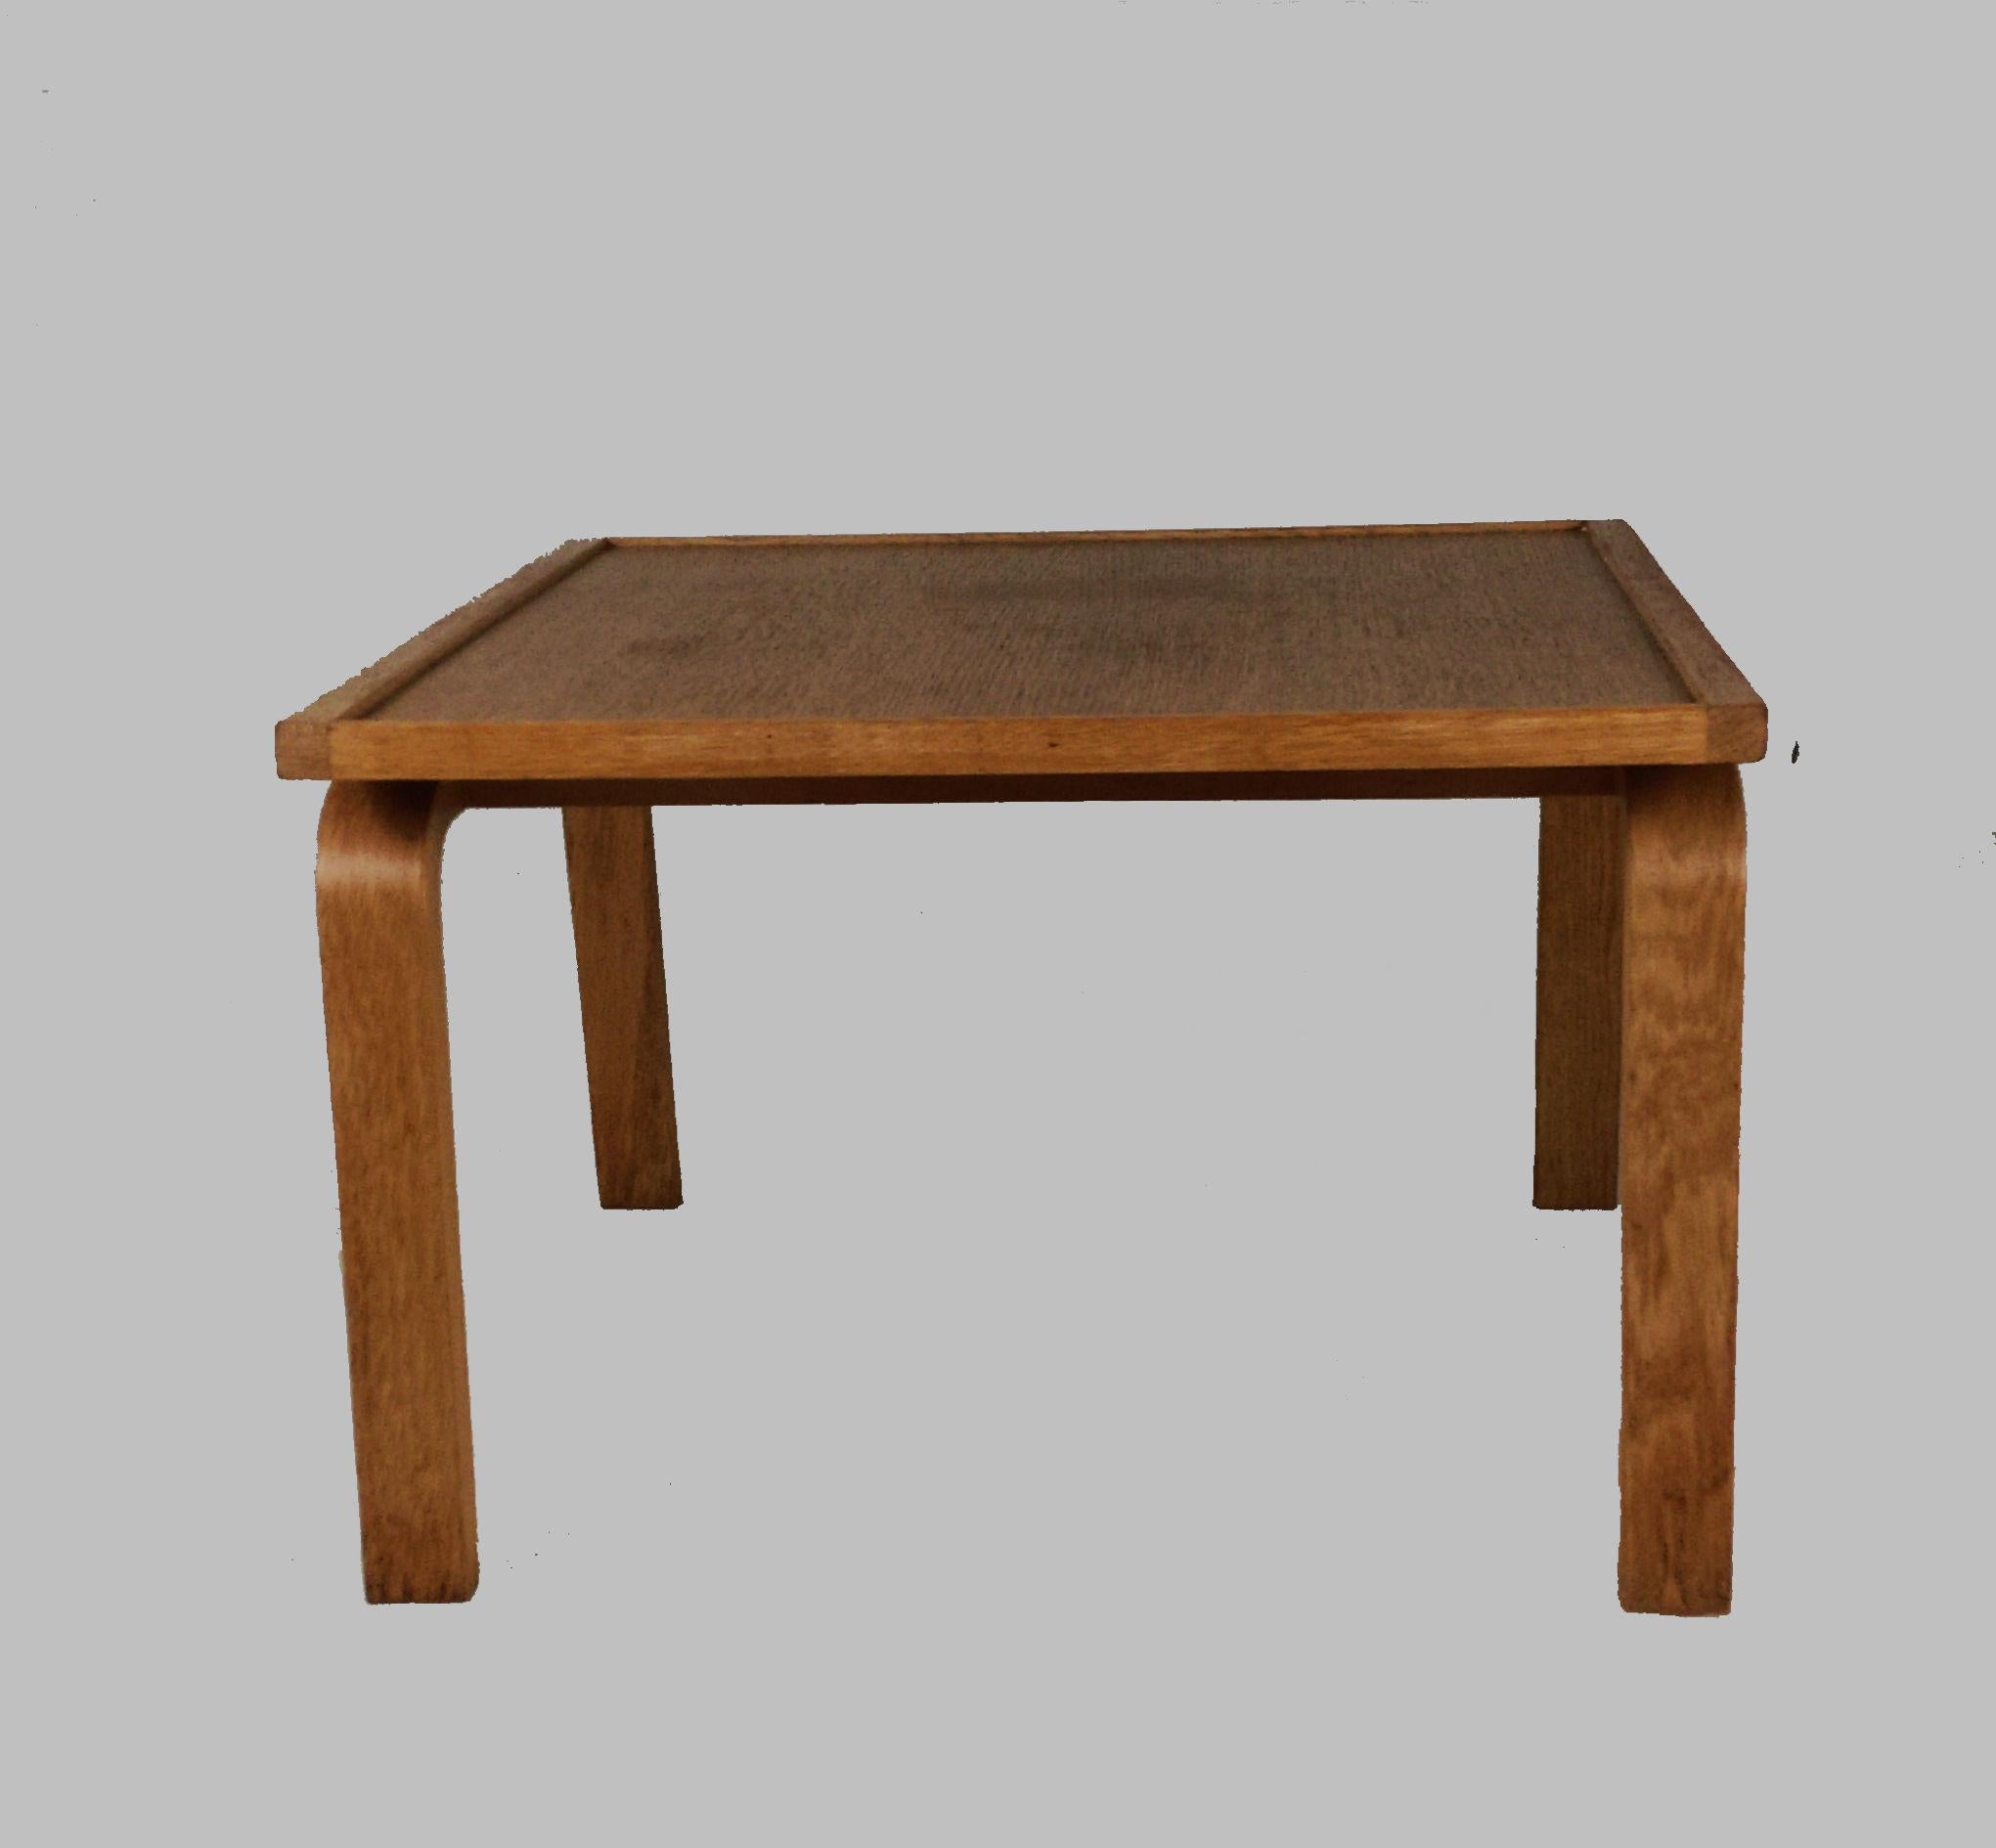 1965 Arne Jacobsen Oak Footstool-Sidetable for Saint Catherine's College In Good Condition For Sale In Knebel, DK